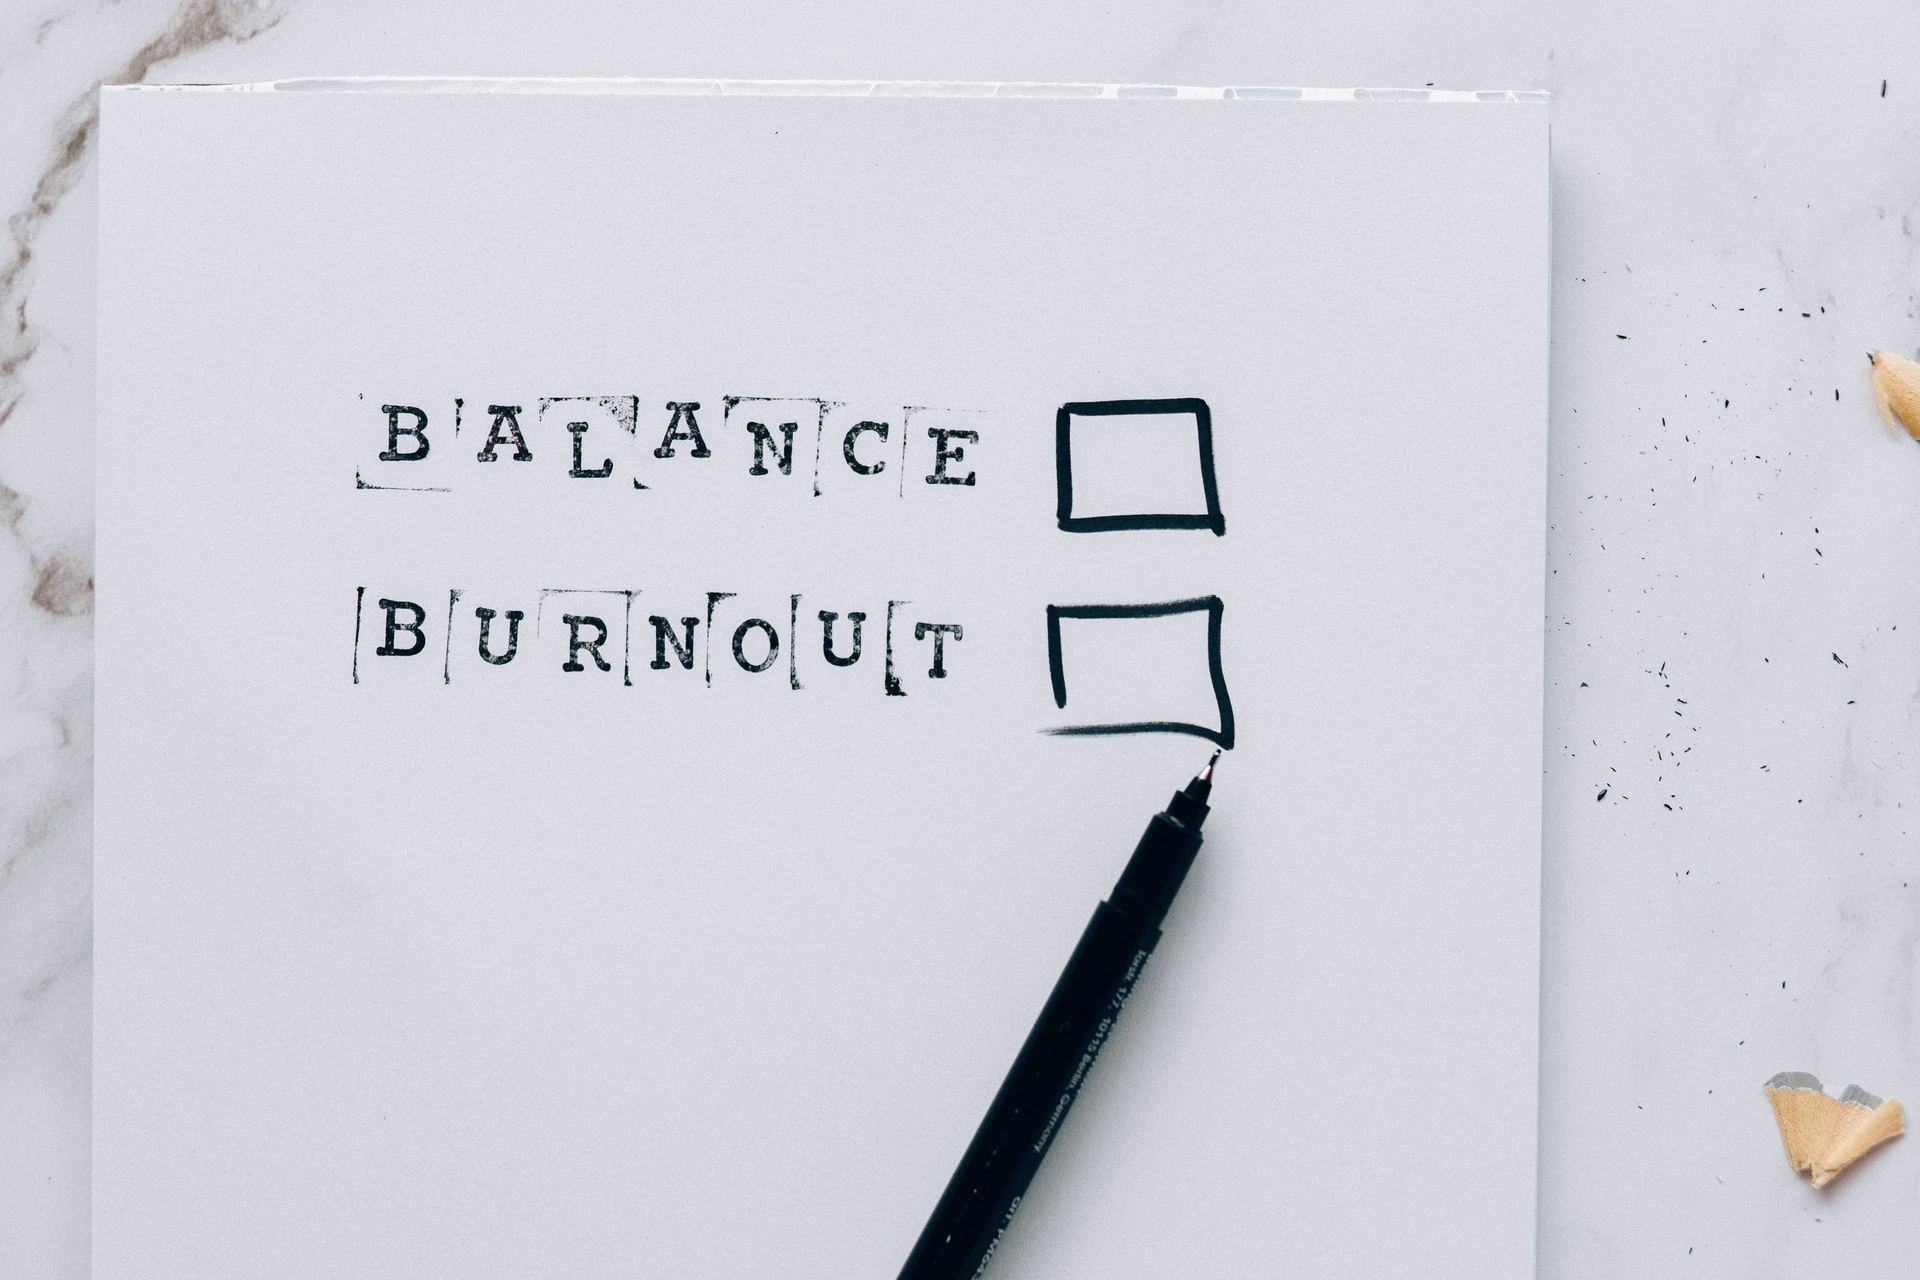 Often people get to the latter stages of burnout before making changes, however, if you can recognize the early signs on the road to burnout, you can prevent hitting rock bottom. 1. Honeymoon Stage – This is the beginning, where pressure may be high but so is the excitement – whether it’s a new job or new baby, you may have lots of energy at this point but as with anything new, there are always some level of nerves and anxiety for the future. 2. Onset of Stress – You may start to notice good and bad days, where some days are more difficult than others and anxiety levels are increasing. At this stage you may notice symptoms like fatigue, irritability, heart palpitations, not wanting to socialize etc. 3. Chronic Stress – At this stage, your stress levels intensify, and the symptoms are much more evident and longer lasting. You may notice you are becoming more aggressive, lacking sexual desire, always feeling panicked, starting to miss deadlines or forget things at home and you may turn to food, shopping, porn, alcohol or drugs to numb the reality. 4. Burnout Crisis Stage – Symptoms of burnout at this stage are critical. It becomes really difficult for a person in this stage to function. You may notice you are losing control of your life and tend to isolate yourself from the outside world. You might notice chronic headaches, problems with your gut like IBS, want to move away from people and the world as you know it, feel empty and lonely with no desire to socialize. Things that used to bring you joy, no longer do. Everything seems like an effort, even going on holiday seems too much hassle, the packing, airport etc puts you off. Hard to keep going. 5. Habitual Burnout –People who have reached stage 5 will feel extremely low moods, show signs of depression and will be mentally/physically and emotionally done. At this stage you are likely to develop chronic illnesses, severe anxiety, and ongoing irritability, depression and negativity. It’s common for people to feel like they are stuck, trapped and victim to their thoughts and bodily symptoms. In stage 3, 4 and 5 it’s important to get help, ideally professional support and sharing your needs with friends and family. If this is resonating with you, please know that you are not alone in your struggle and you don’t have to suffer on the journey to recovery alone either. I want to share tips that can help you if you feel you are getting stuck in the road to habitual burnout. This is especially important for people who are not able to quit their job or jump on a plane and go on a luxurious holiday retreat to ease their chronic stress. • Establish good habits from the onset – If you are starting a new job or you’ve just had a baby, it is important to think realistically and not idealistically. By this I mean, we all want to give 150% when we embark on a new journey, exercise regularly, keep up with our social and family life however, when doing this we are setting the bar way too high. Doing extra work or taking on all the responsibility at home just makes it harder for you to maintain this level of energy and effort. Learn not to take on too much in the beginning, so that you can adapt to your new role/new baby first and then handle the rest of the load as time goes on. If you didn’t set up the right habits to start with, start now create both an idealistic plan and a realistic plan, then be happy when you meet the minimum plan and see anything else you do as a bonus. Give yourself praise for the things you do and the rest you take. • Saying No is saying Yes to yourself - A major thing that comes up in many of the breakthrough sessions with people I help is people pleasing, not being able to say no to others. It is so important to say no to extra work, activities and chores. If you find it difficult to say no in the moment then, start to practice saying – let me check and get back to you. You can say, let me check my calendar, let me check with my partner, let me see what the children have on. With work, perhaps say I could do that, I have this and this to do first so I could get to it by Thursday next week if it’s important. Sharing what you have on and setting realistic expectations then gives that person the choice to wait or give it to someone else. • Time to Recharge – Remind yourself that taking breaks is not a reward it is a necessity. One of the most common things that comes up for people that I have helped is the reluctance to ask for help. Whether it is in the work place or home it takes courage to be vulnerable and to say, I am overloaded at the moment could I get some support. Being assertive is important. Remind yourself that if you don’t ask for help then your suffer and could get burn out which would be good for nobody your supporting. We are less productive workers, parents, business owners when we are stretched, and spread ourselves so thinly. Take time to recharge and realign yourself. For me that is a morning walk, a guided meditation in the day and something creative in the evening. • Prioritize sleep – I can’t stress this enough – a healthy sleep routine can do wonders for your mental clarity and energy levels. Call me boring but I go to bed roughly the same time on the weekend as I do in the week, I like the routine to be the same. Even if you focus on having at least 5 nights of good sleep, your body will cope with a couple of nights of unrest. If you are suffering burnout from work, have a set time where you answer no work emails and focus on relaxing closer to bed time. A bed time unwind routine is key. I watch standup comedy to relax, laughing before bed is good for me and I always listen to a hypnotherapy track to switch off my mind into sleep. If you are nurturing a baby organizing shift work can help or sharing the housework and other activities, so that you can rest. • Maintain connections with loved ones – It can be easy to get lost in the world of being a new mum or working a new job. It is so important to make a conscious effort to spend time with your loved ones – the ones who lift you up and make you feel special. I hear mums say too often that while they are focused on being a good mum, they forget to enjoy experiencing their children grow up. So take time out to have family time – it doesn’t need to be anything major, even a movie night at home with homemade treats can be fun! This really helps to build a strong bond between you all and gives you that much needed boost of serotonin! • Redirect your negative thoughts – When you compare yourself to others, or even if you find yourself comparing you to a younger version, you are instantly putting yourself on the back foot and thinking you are not doing as well as the other person or what you used to do. This influences the way your mind processes what you can do – if you keep telling yourself “I’m not a good mum” “I can’t handle this new project” or “I’m going to fail” etc, your unconscious mind is going take this as verbatim and act on it. It’s like a downward spiral – thoughts become things so be careful of the thoughts you allow to flow through your mind. Following on from the last point I just mentioned – I feel it is important to share that for a lot of people I have helped in my breakthrough intensive program, one of the main things that came up that contributed to feelings of burnout is having unresolved traumas and emotions that are screaming out for attention.